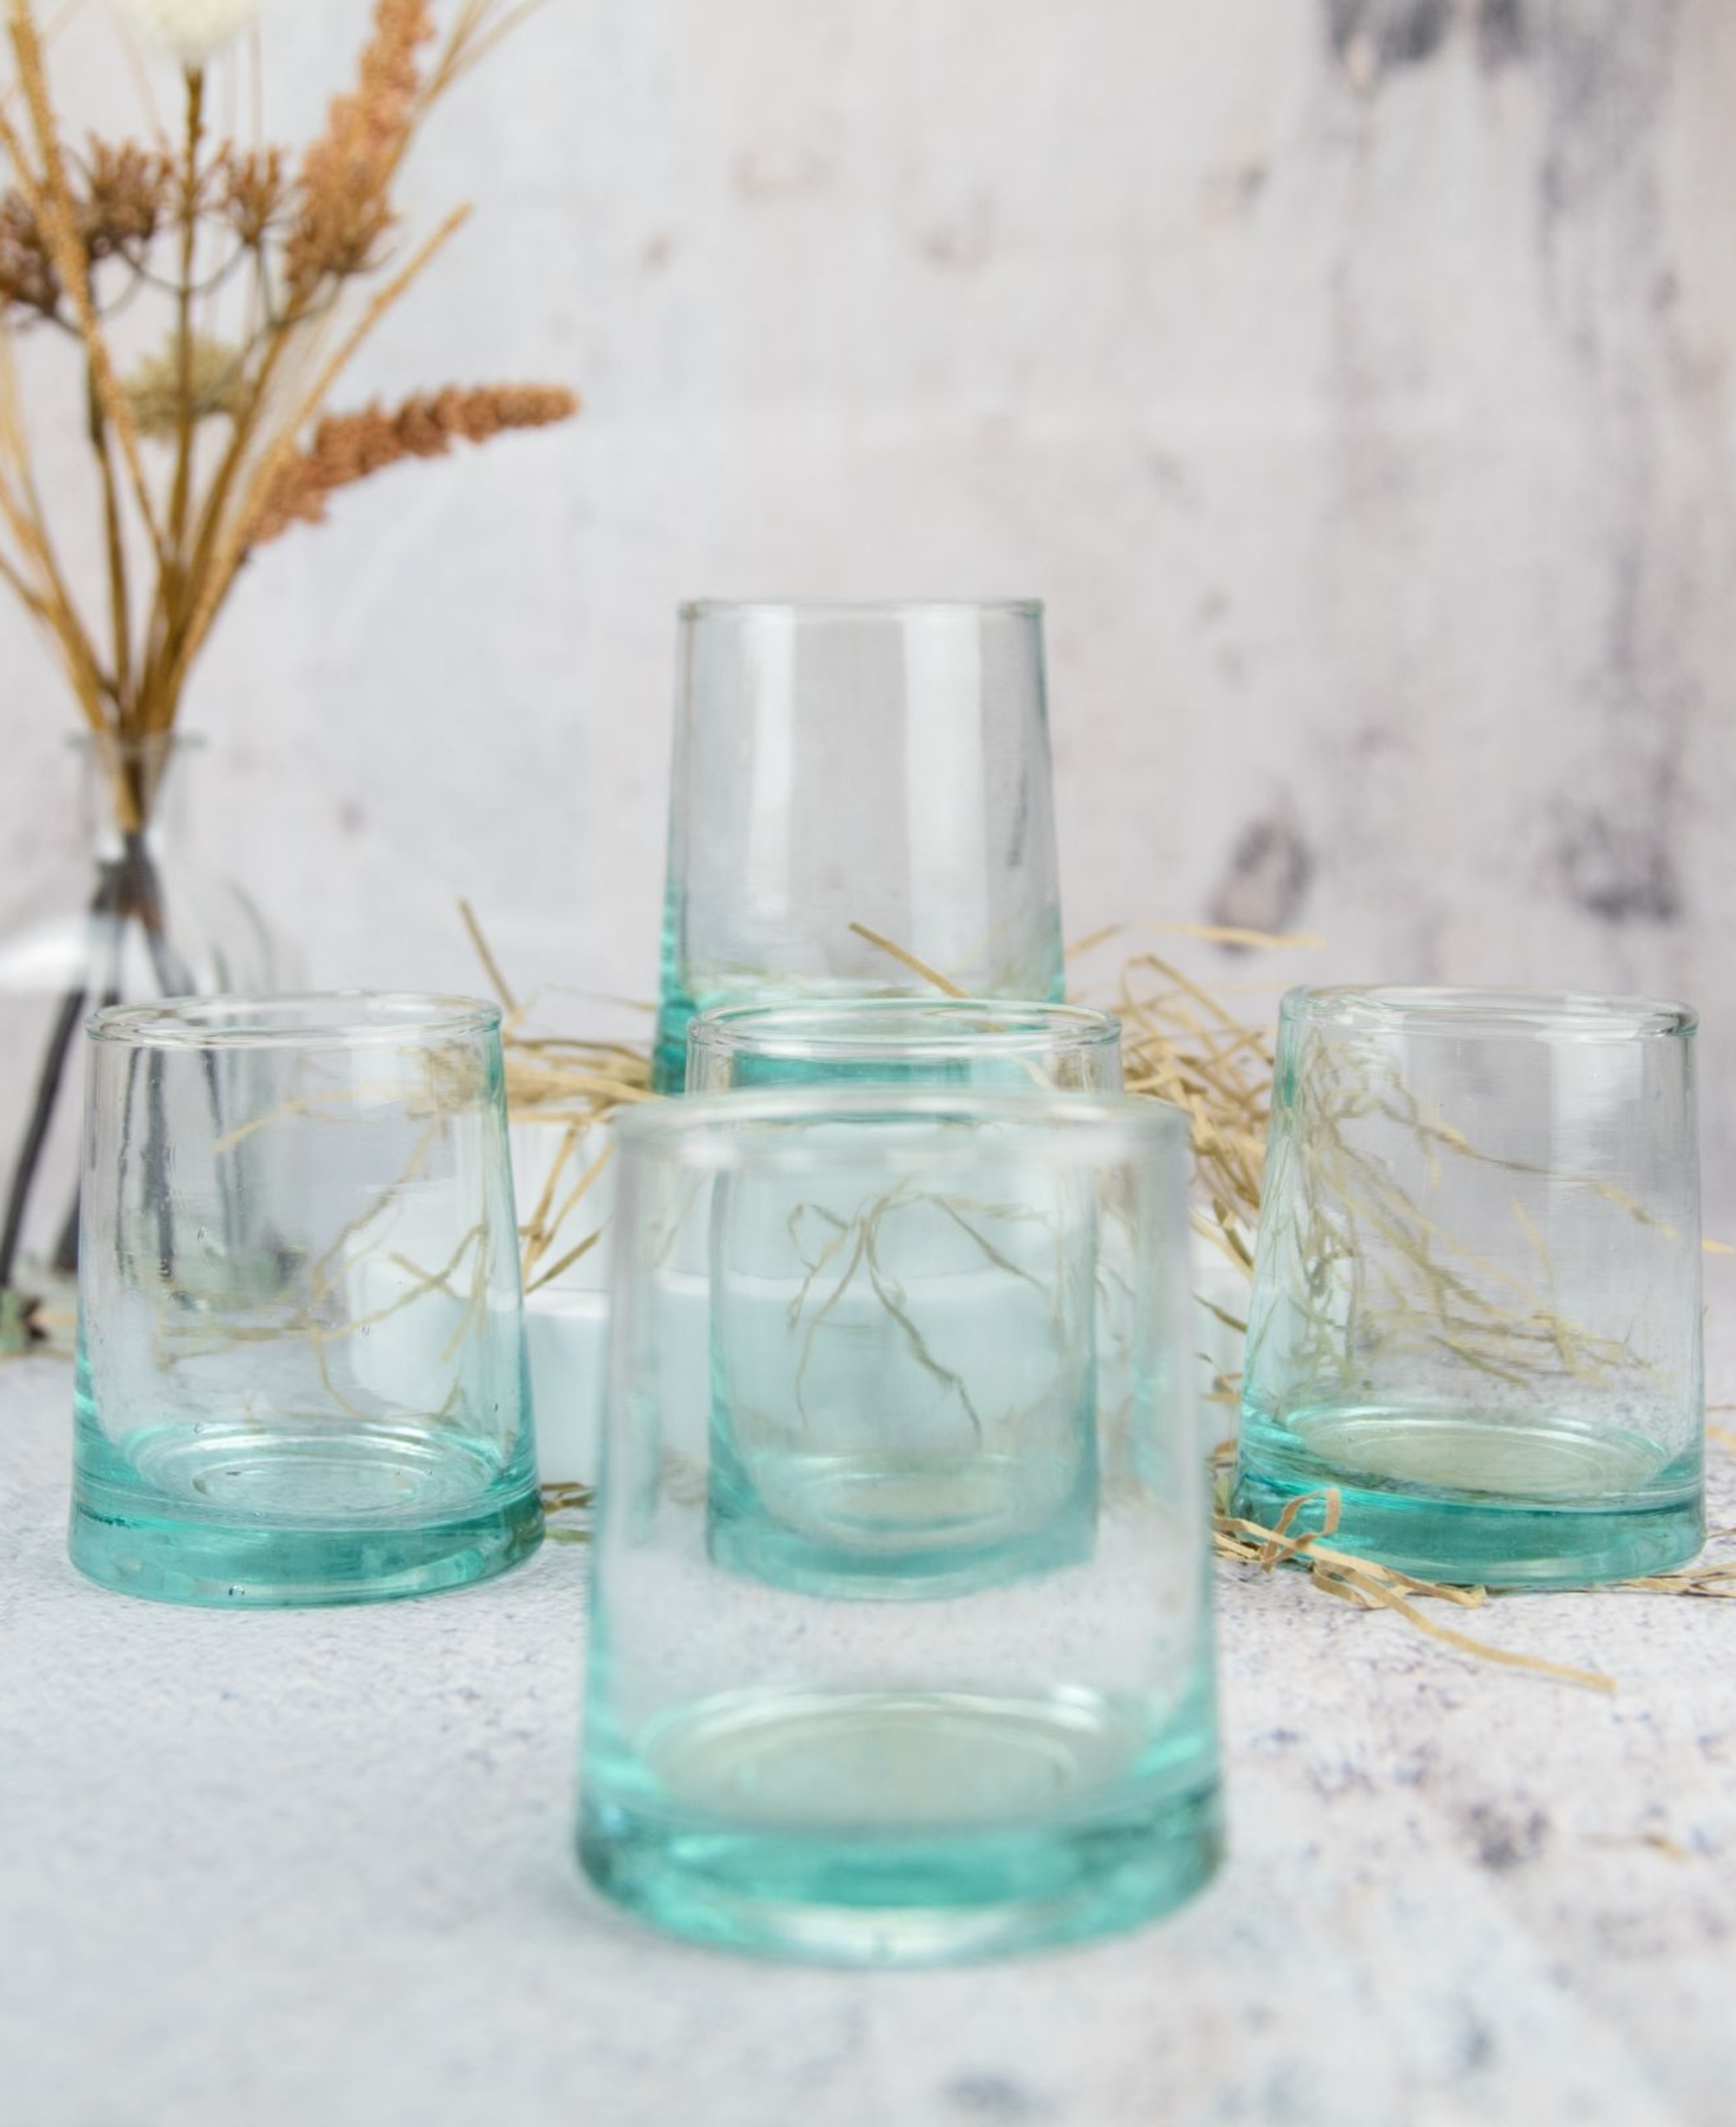 Set of 4 Recycled Moroccan Sustainable Tumbler Highball Glass - Handmade Beldi Handblown Clear Glass 